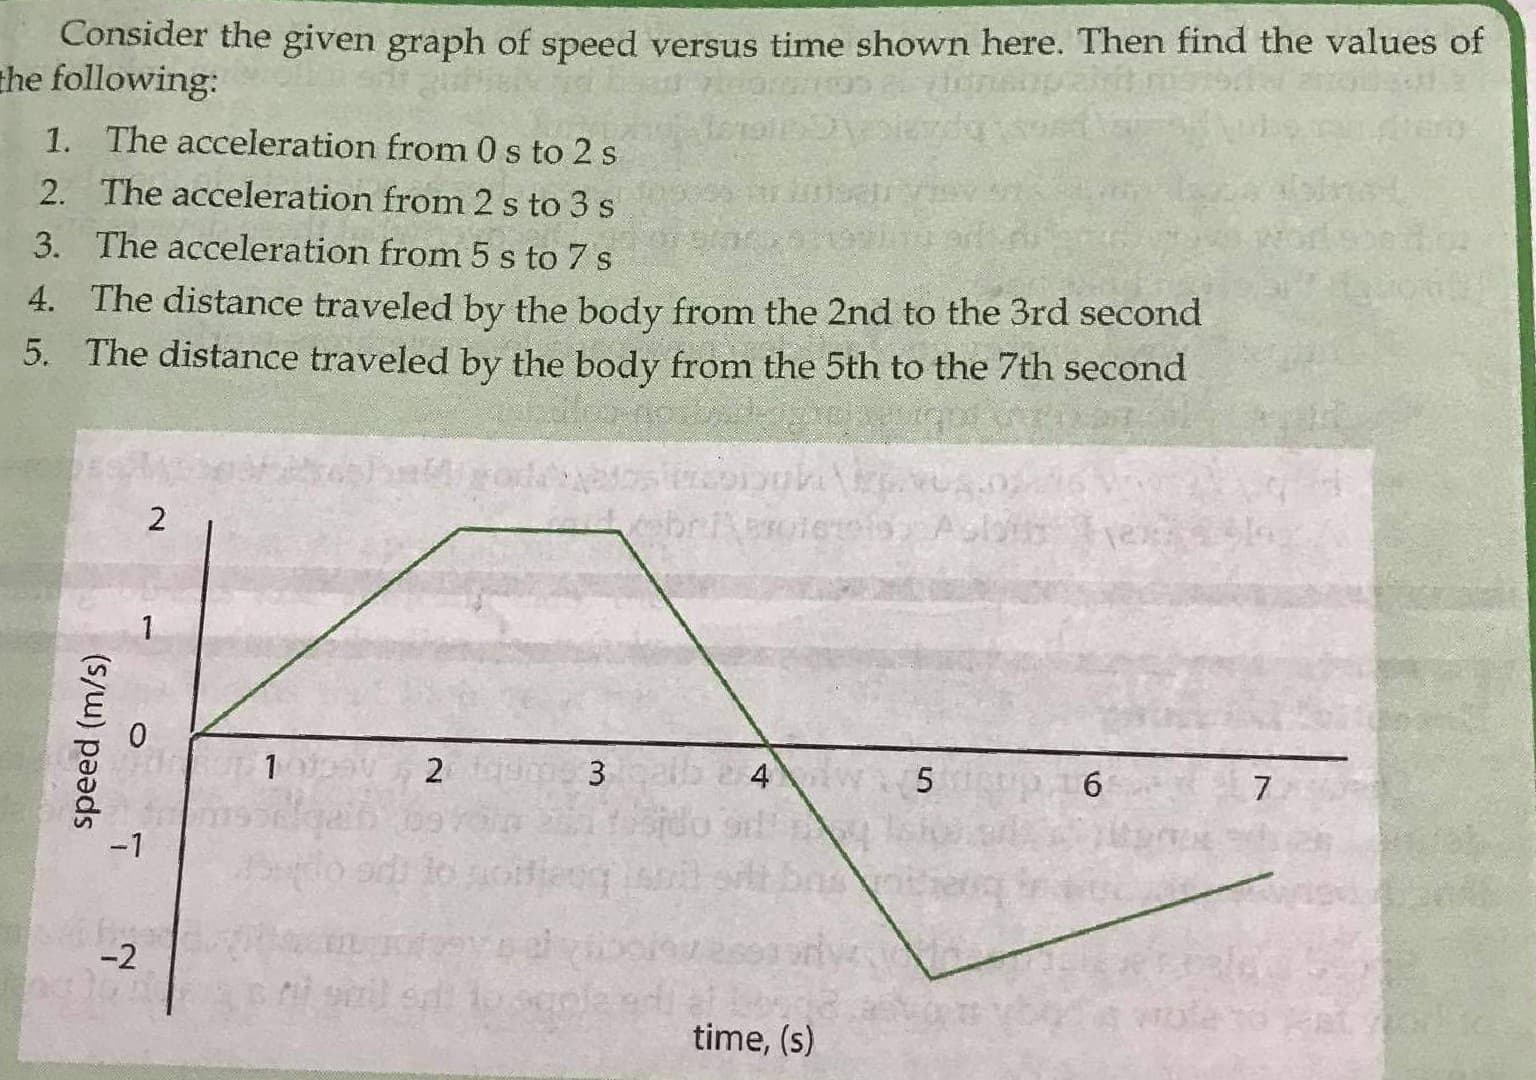 Consider the given graph of speed versus time shown here. Then find the values of
he following:
1. The acceleration from 0 s to 2 s
2. The acceleration from 2 s to 3 s
GIGIS
3. The acceleration from 5 s to 7 s
4. The distance traveled by the body from the 2nd to the 3rd second
5. The distance traveled by the body from the 5th to the 7th second
1
2
4
5.
7
-1
-2
time, (s)
speed (m/s)
